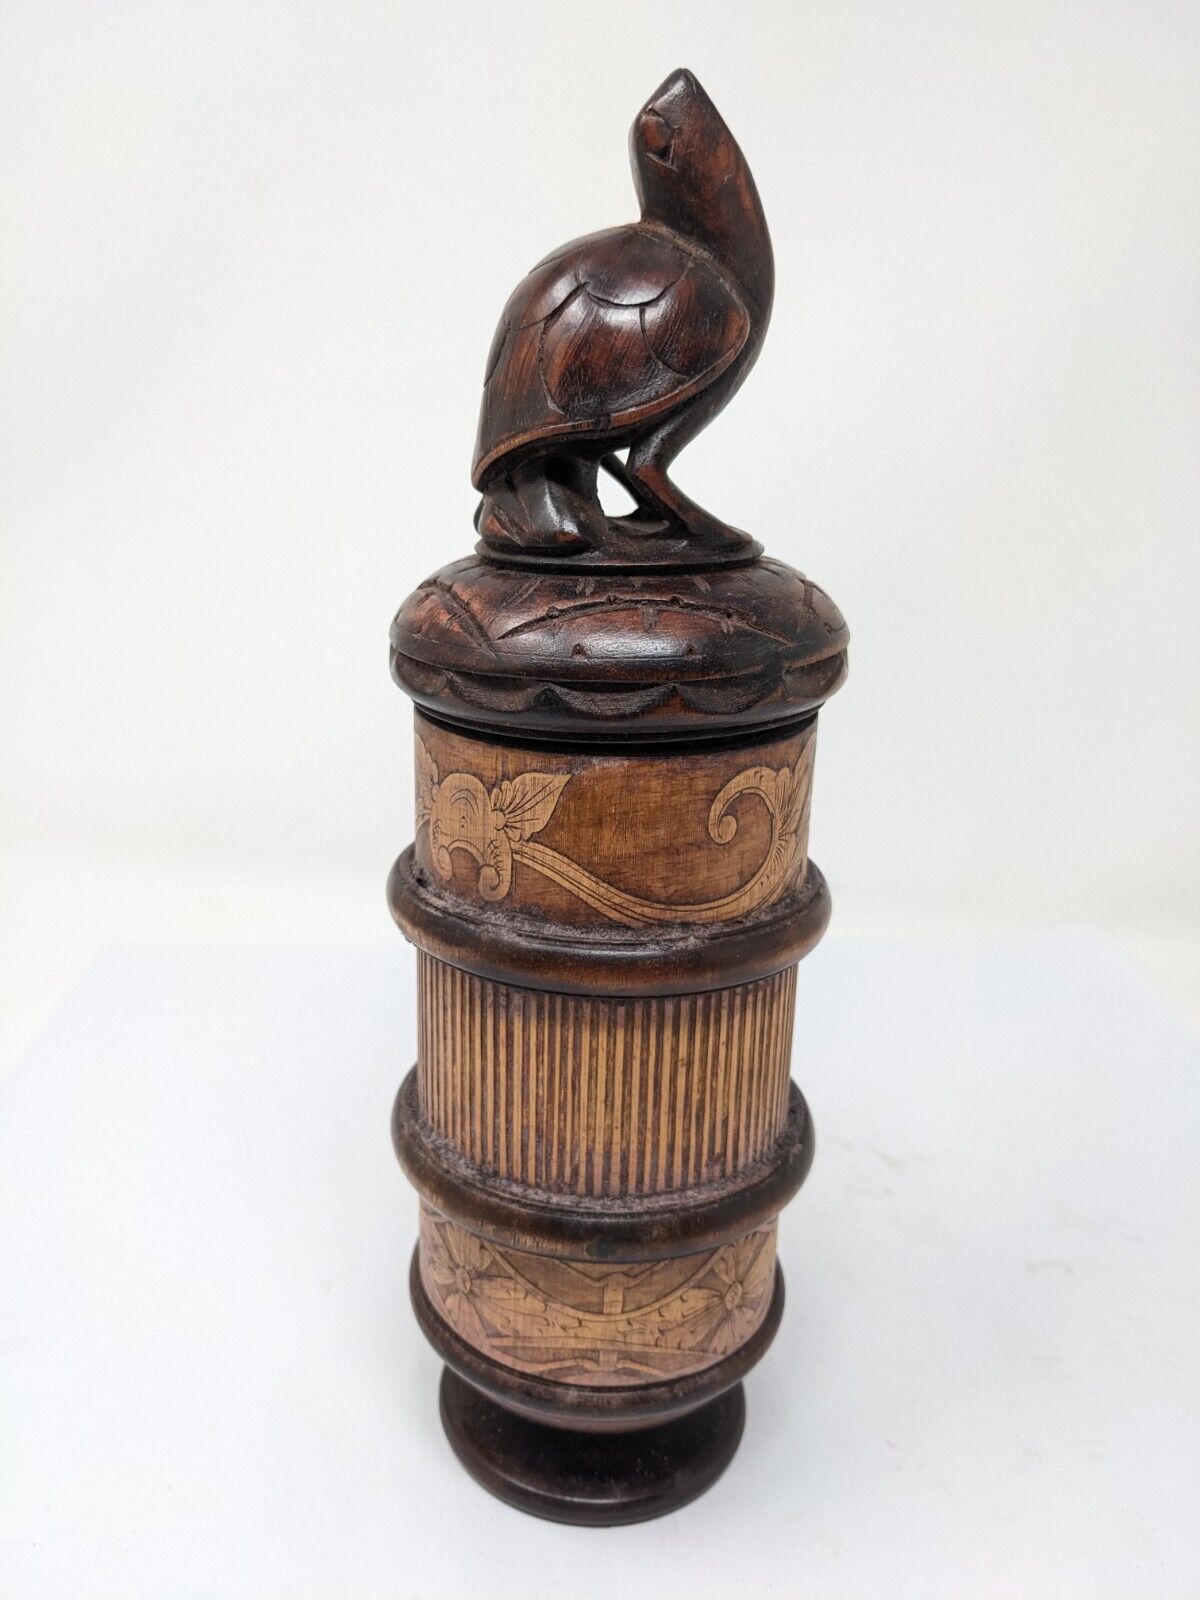 Indonesian / Balinese Handcrafted Wooden Carved Turtle Lombok Container Box